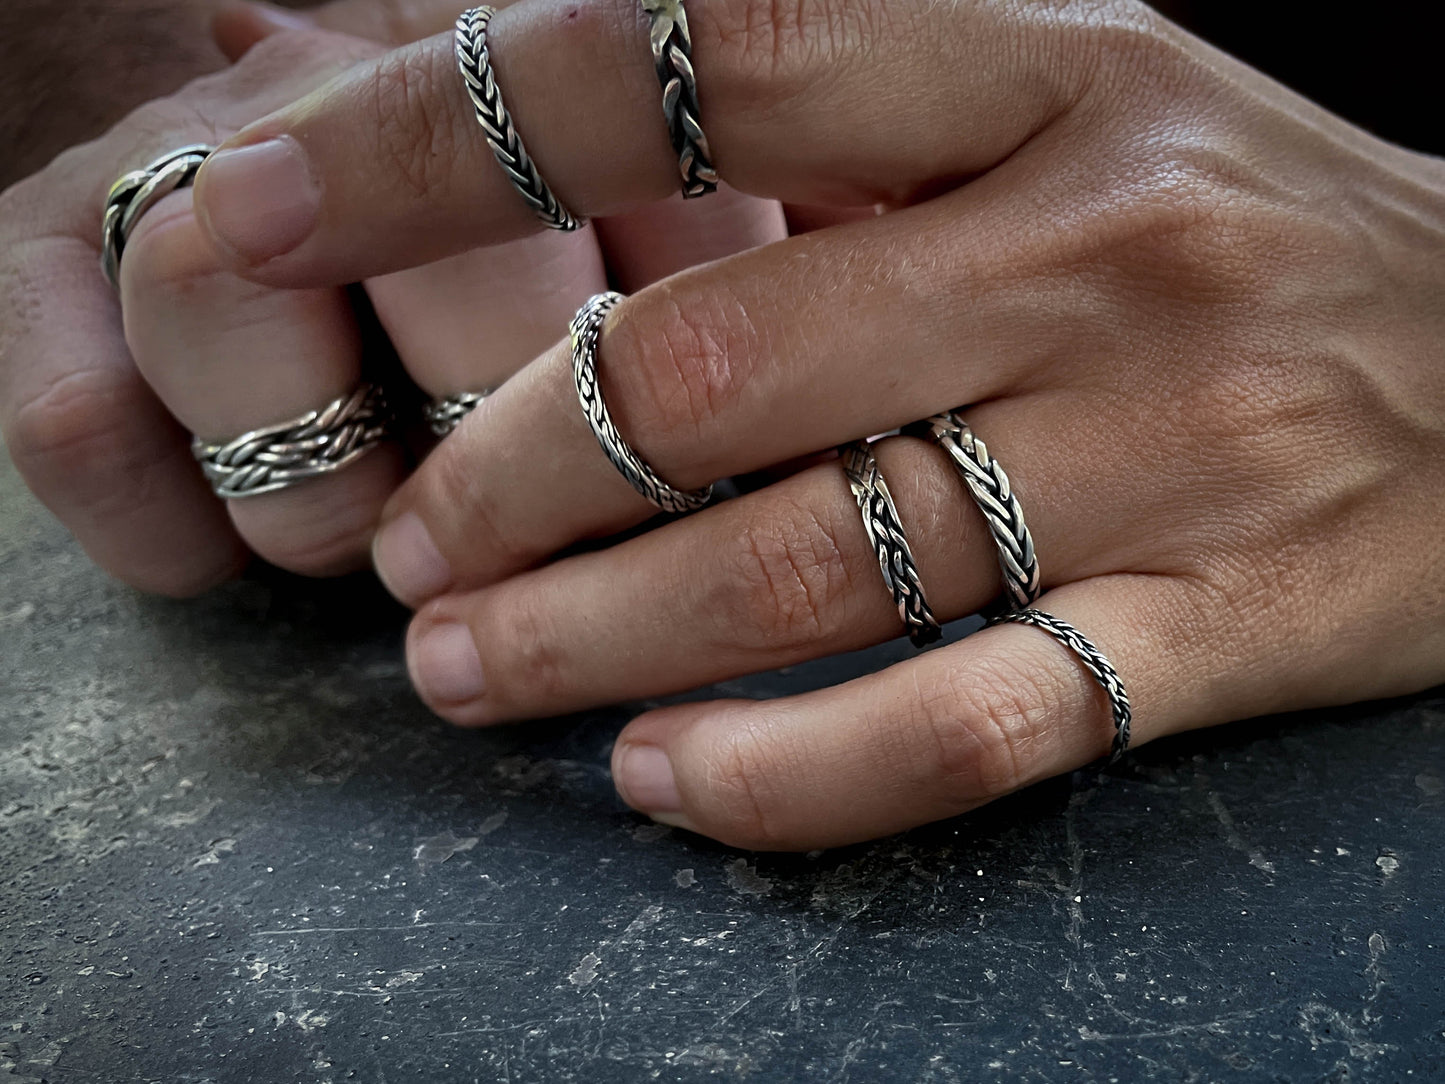 Fine Rope Silver Ring